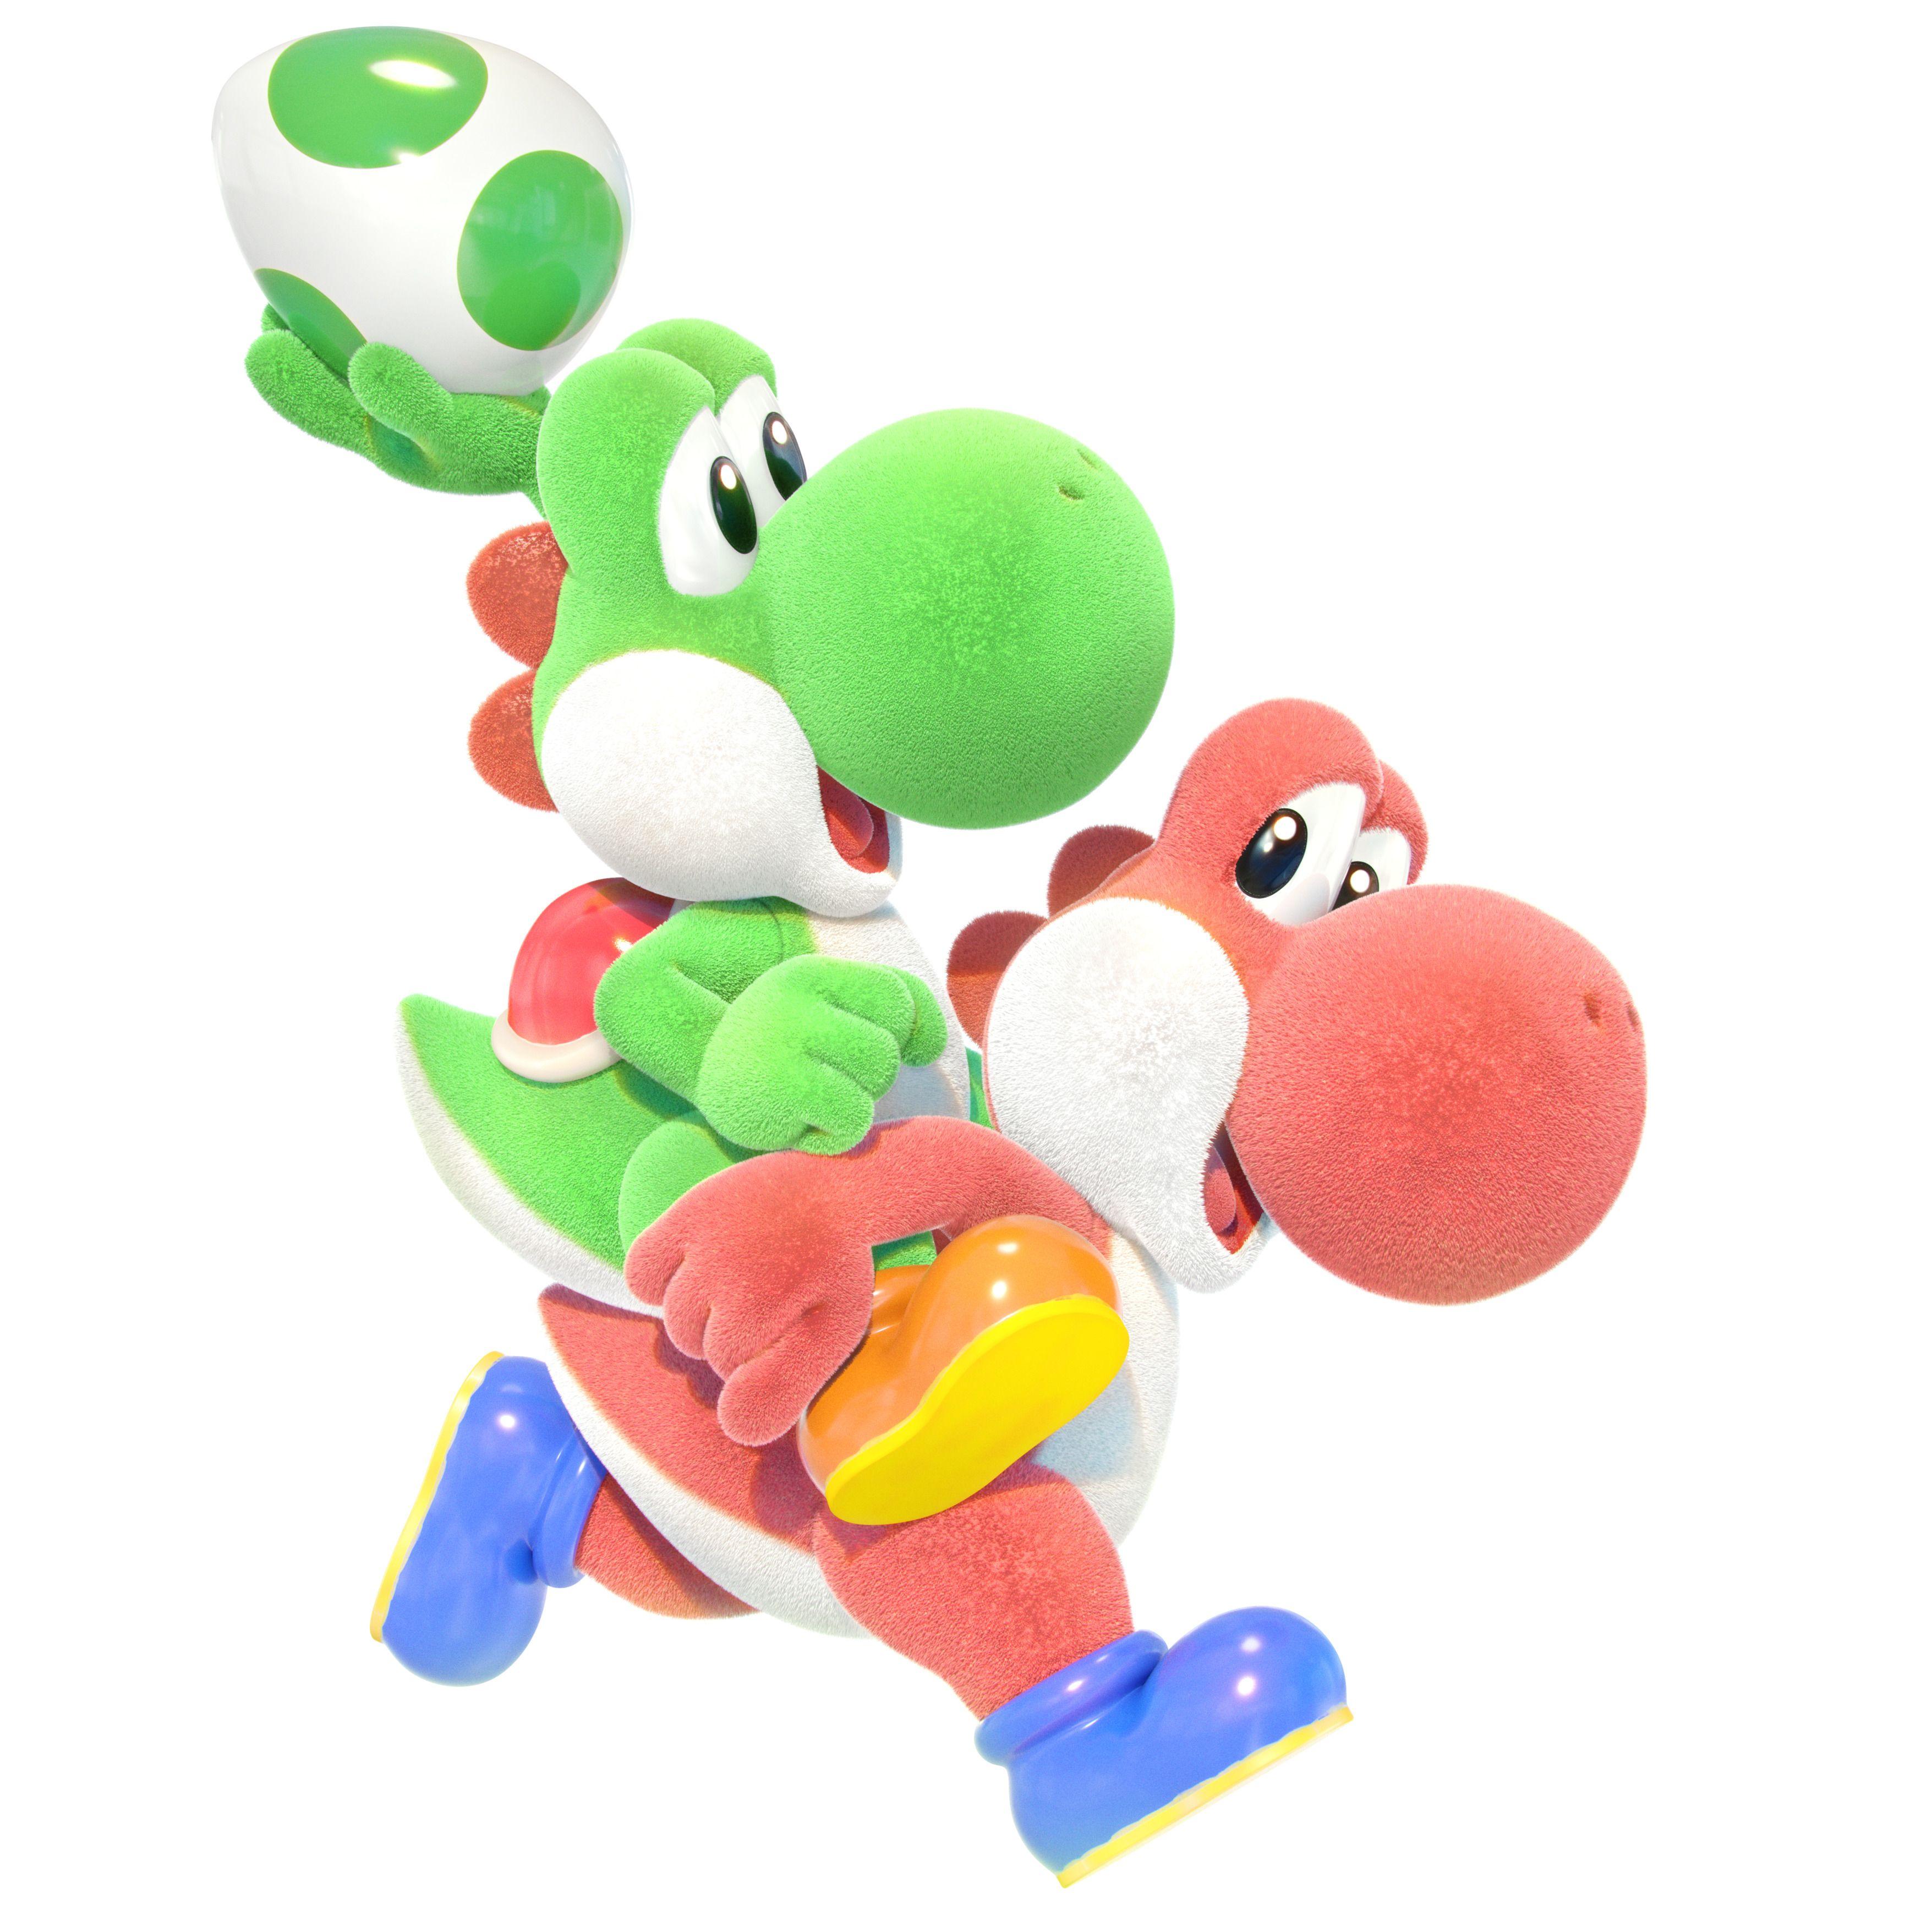 These Image of Yoshi's Crafted World Display True Craftsmanship